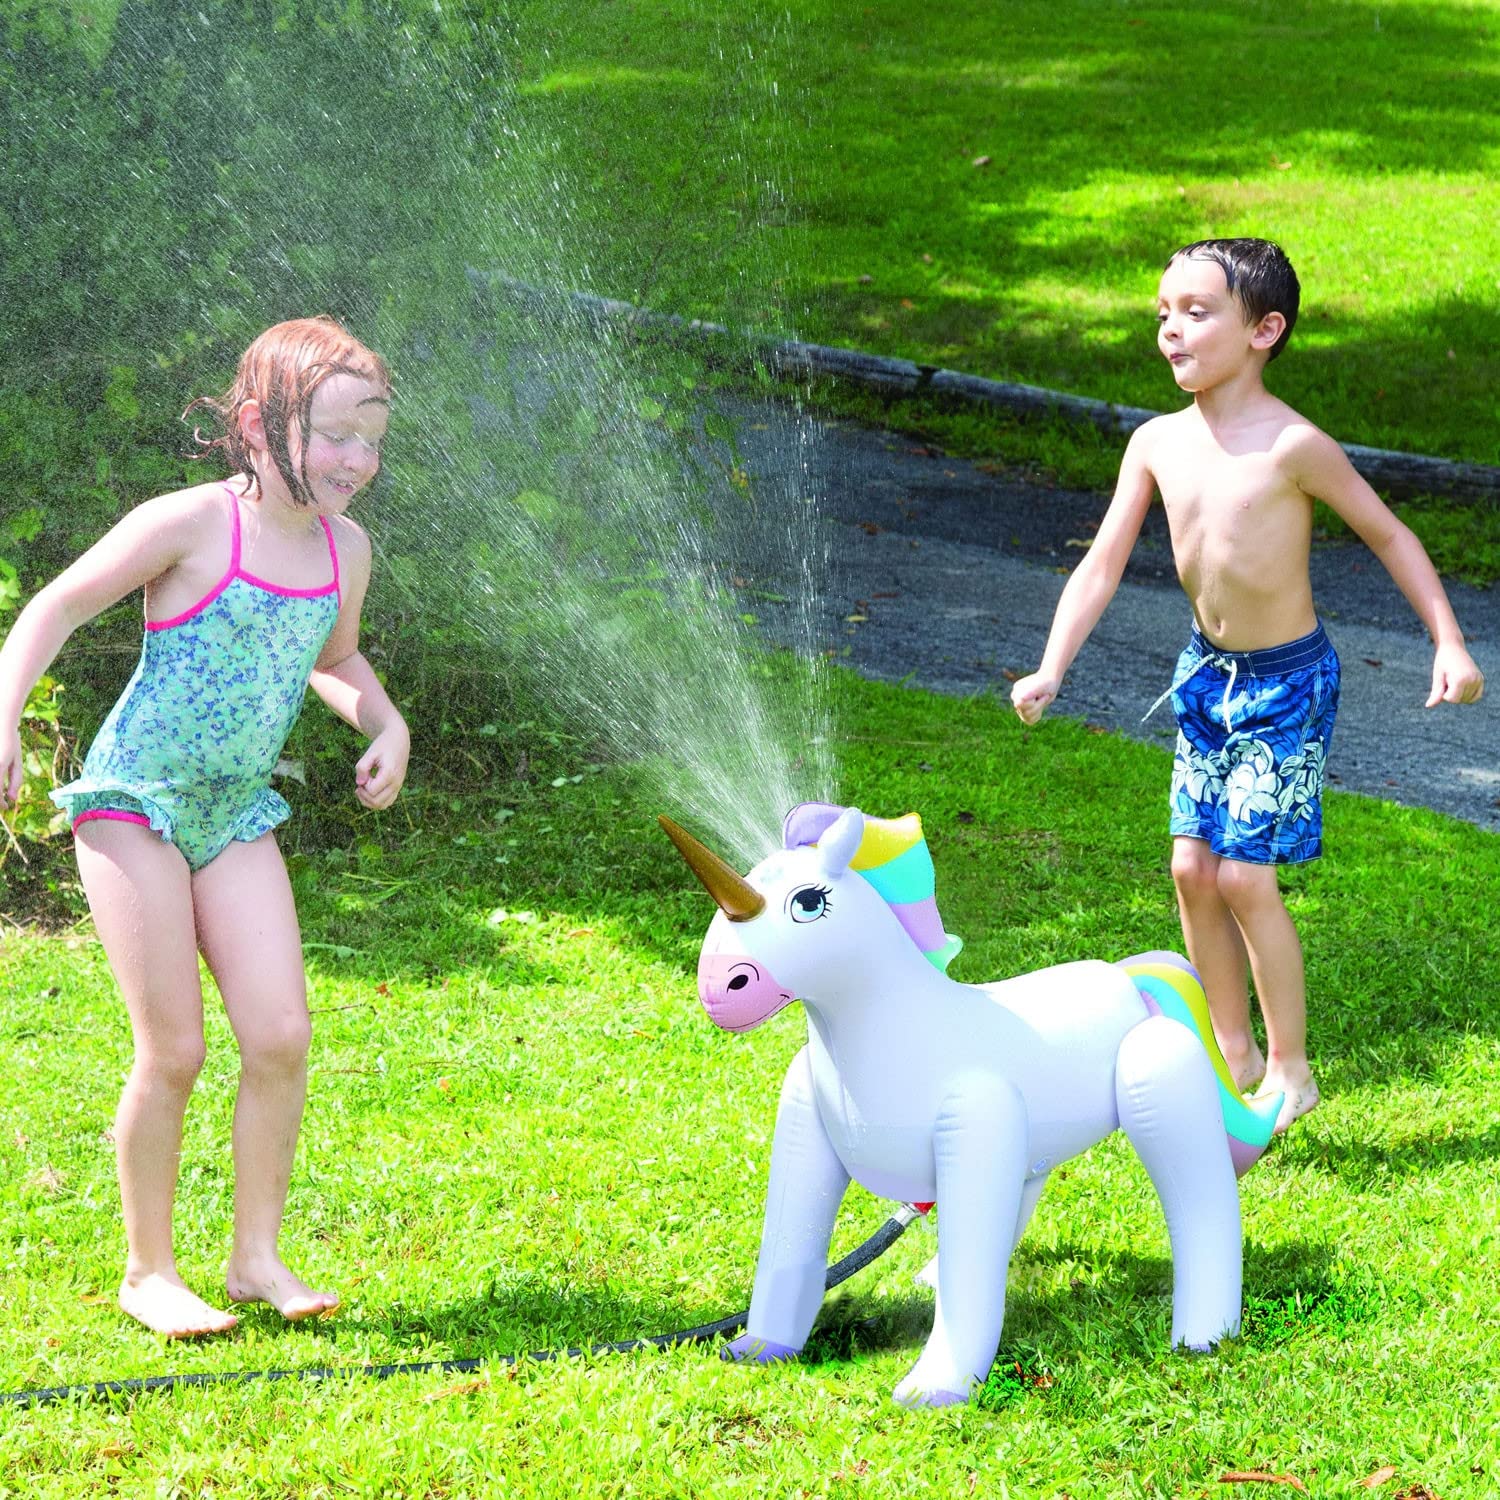 Etna Inflatable Unicorn Sprinkler - Fun Outdoor Water Toy for Kids Attaches to Garden Hose, 33 1/2" High